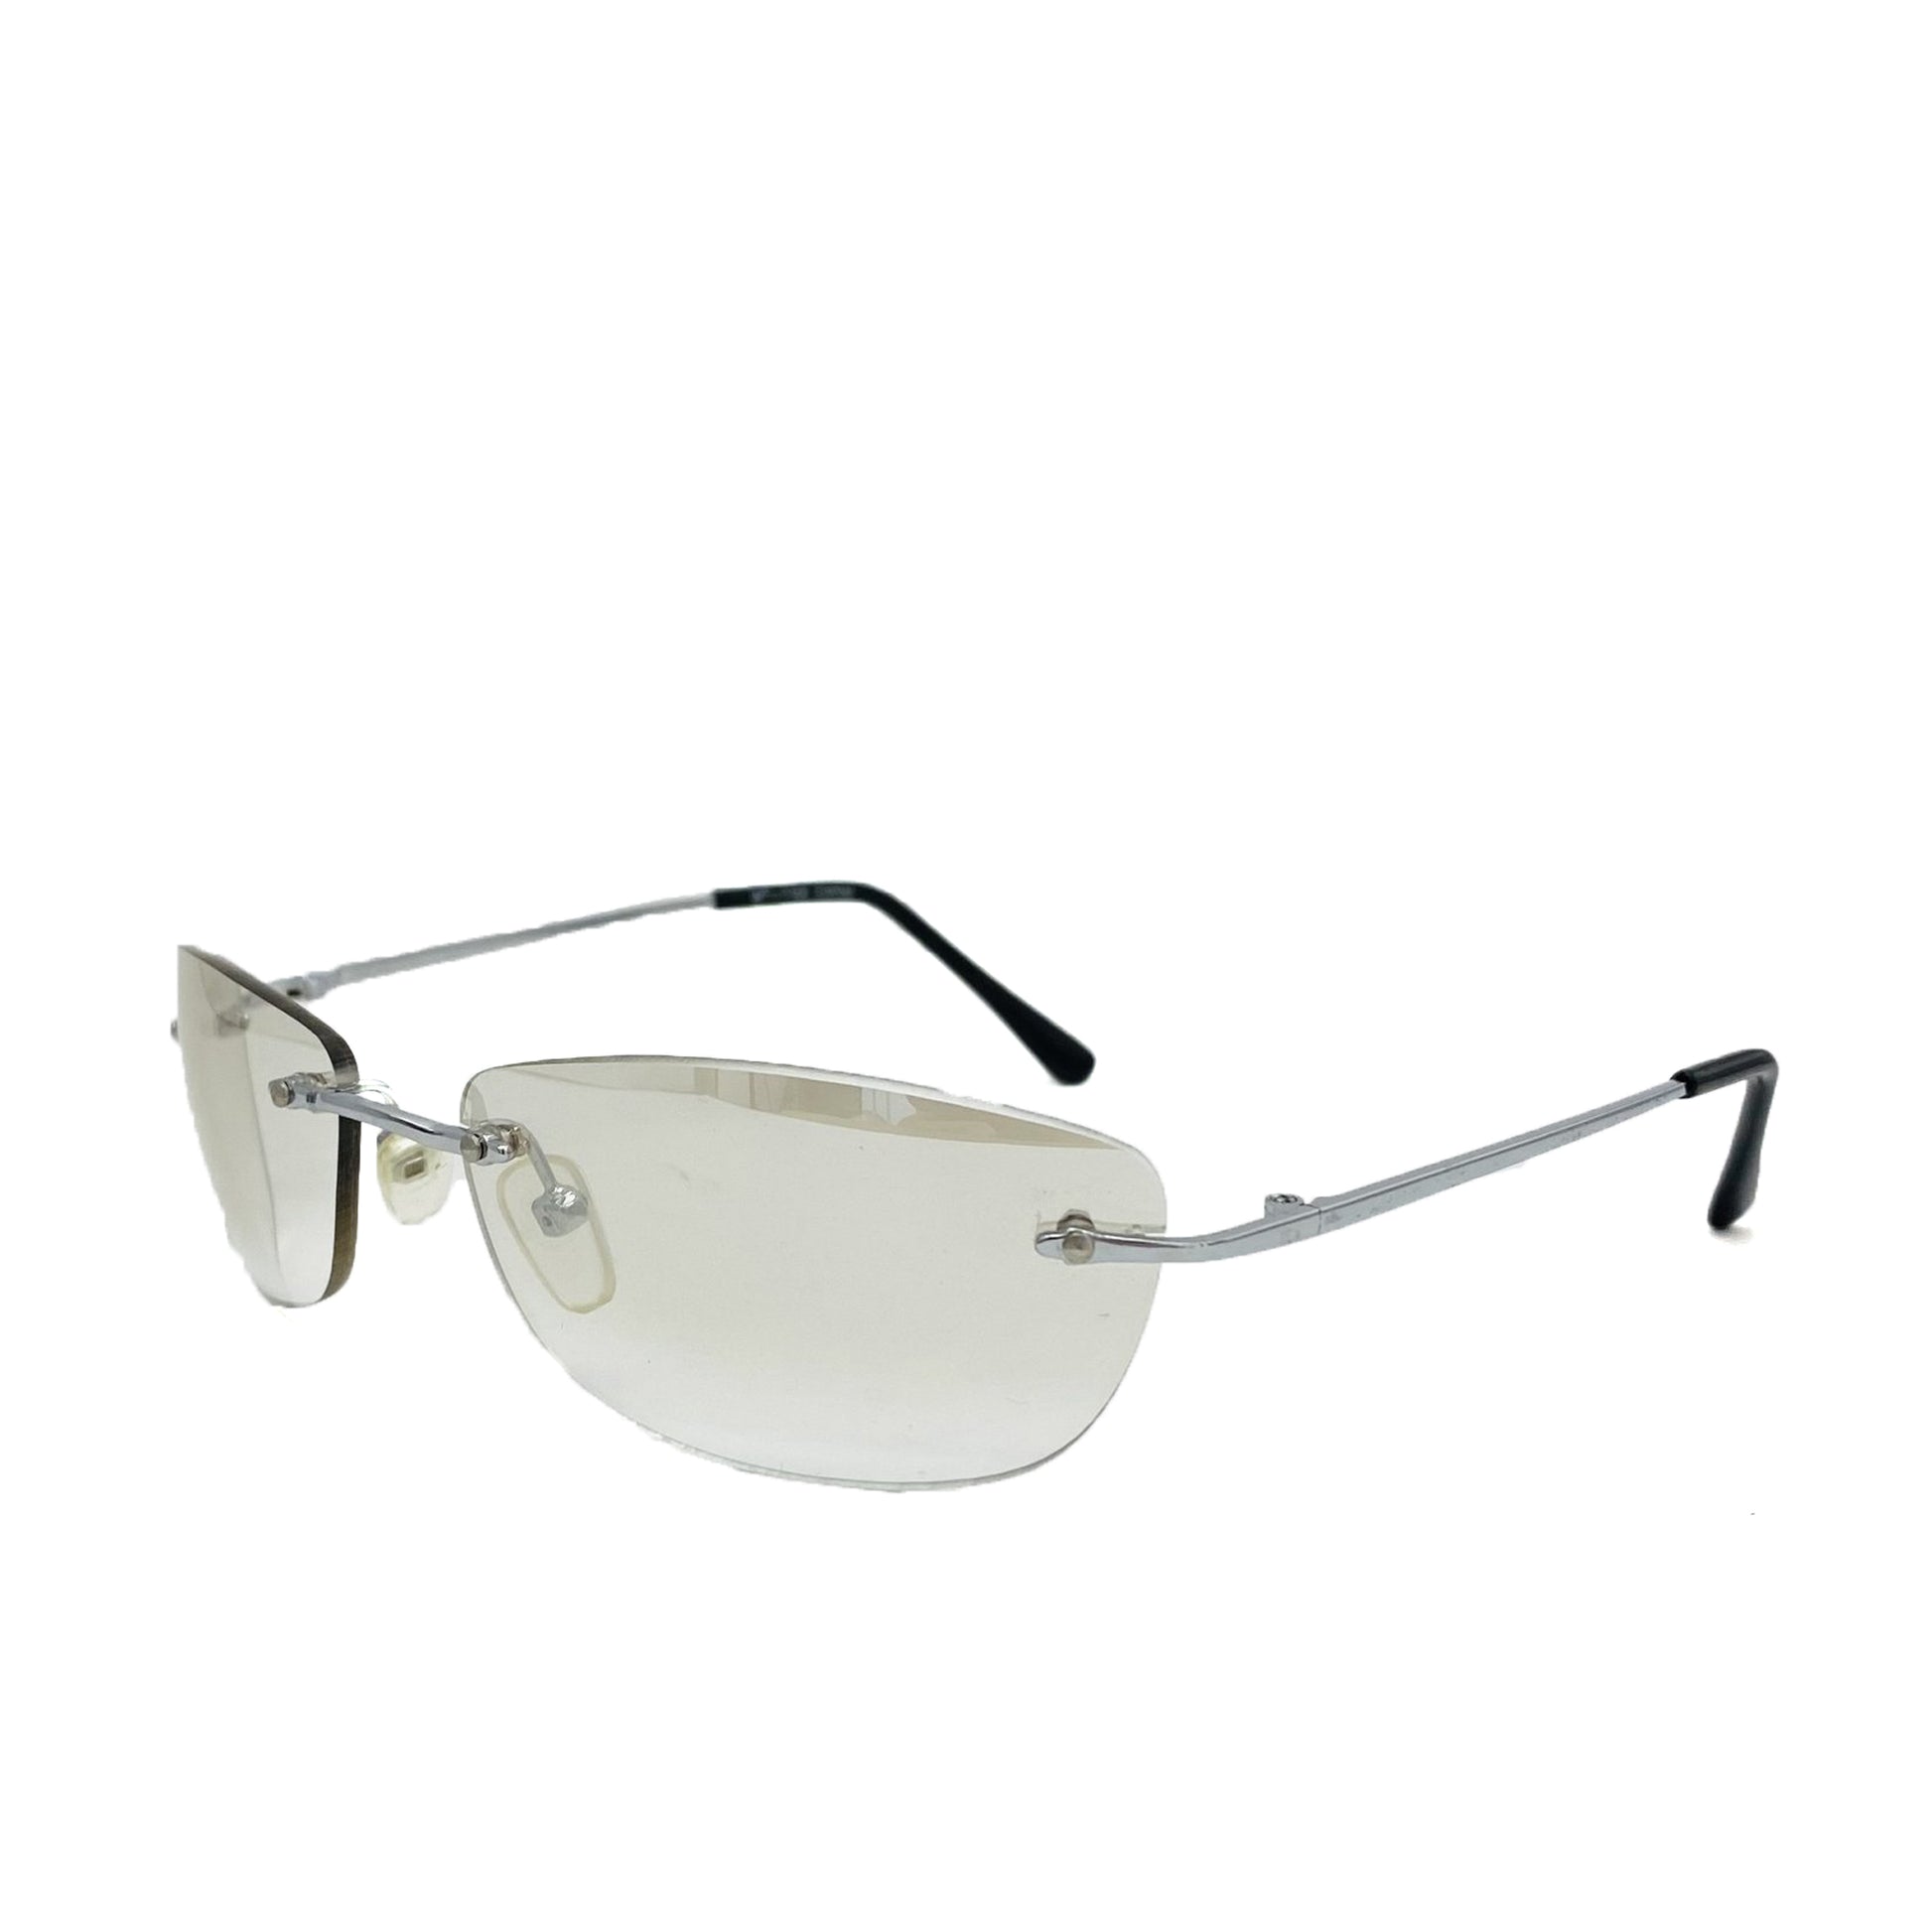 mod style, clear lens, rimless frame, vintage sunglasses with silver color